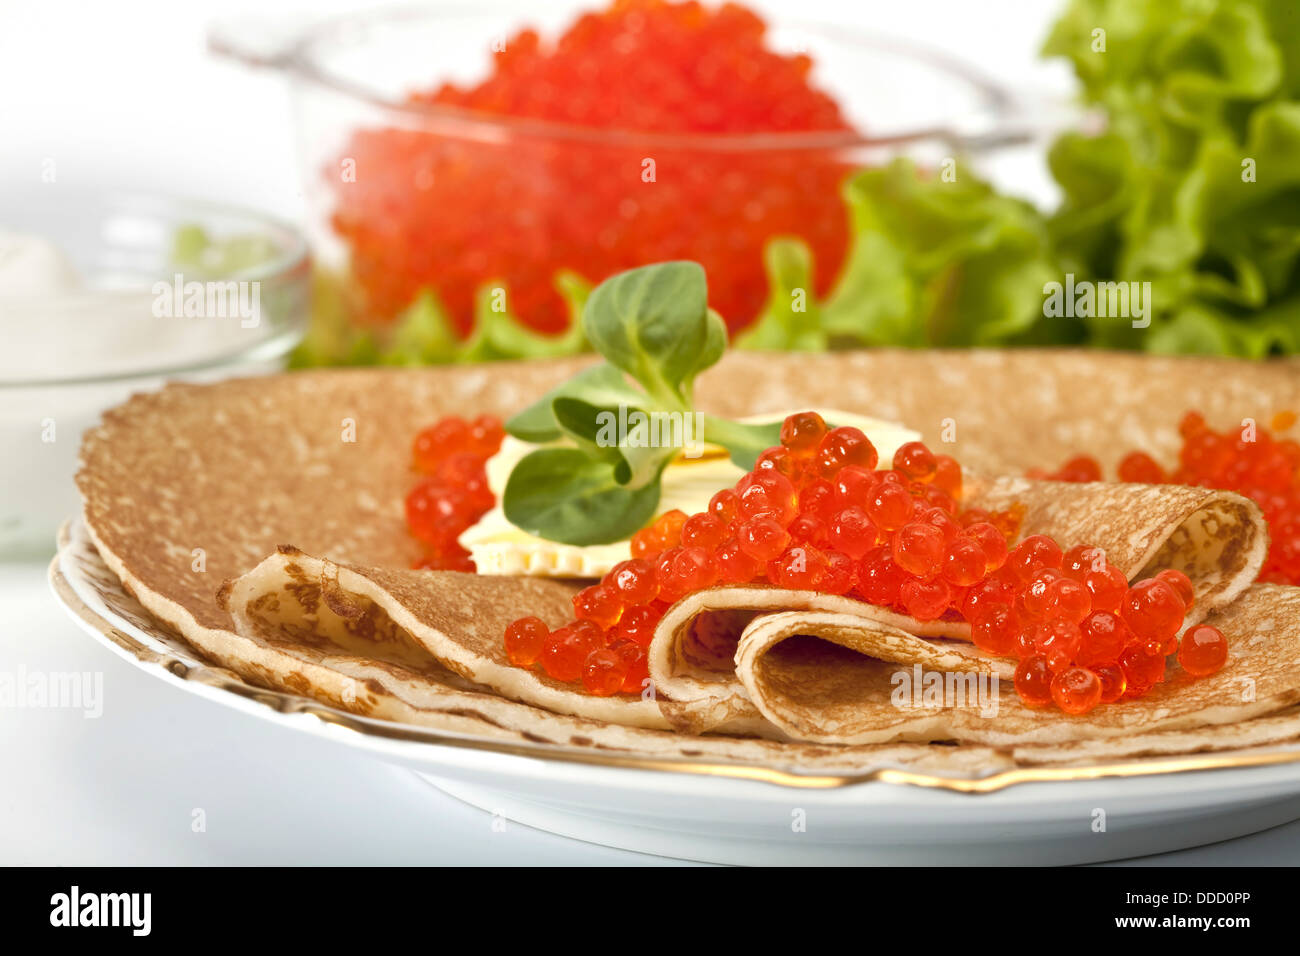 served place setting: pancake with red caviar, sour cream and greens Stock Photo